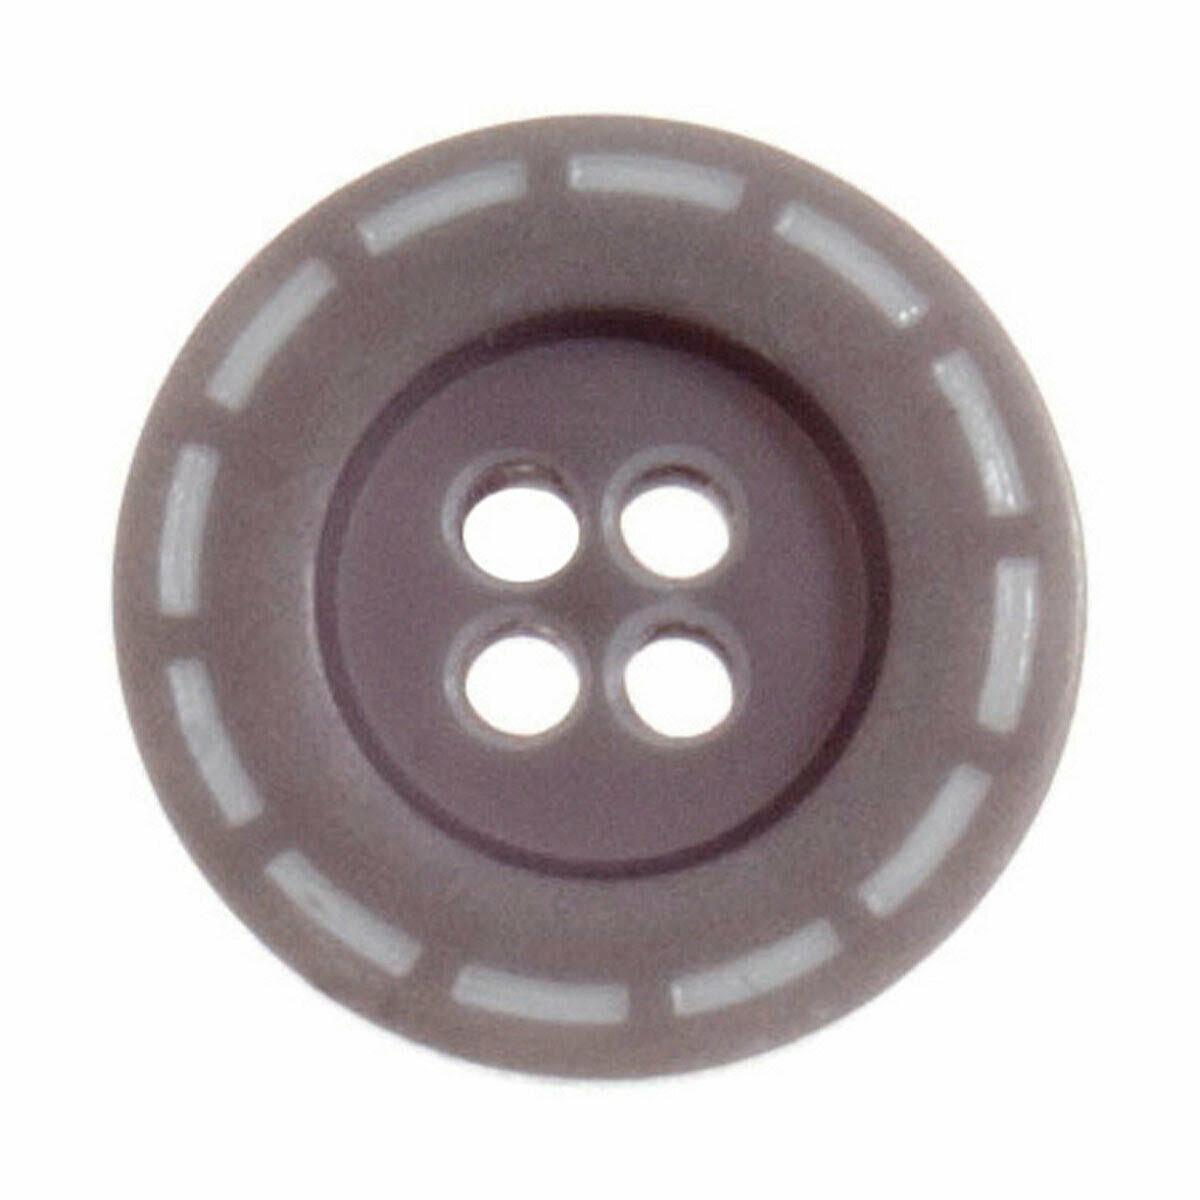 Trimits 100 x Jacket Button 4-Hole 24 lignes/15mm Black Sewing Craft Tool Hobby 